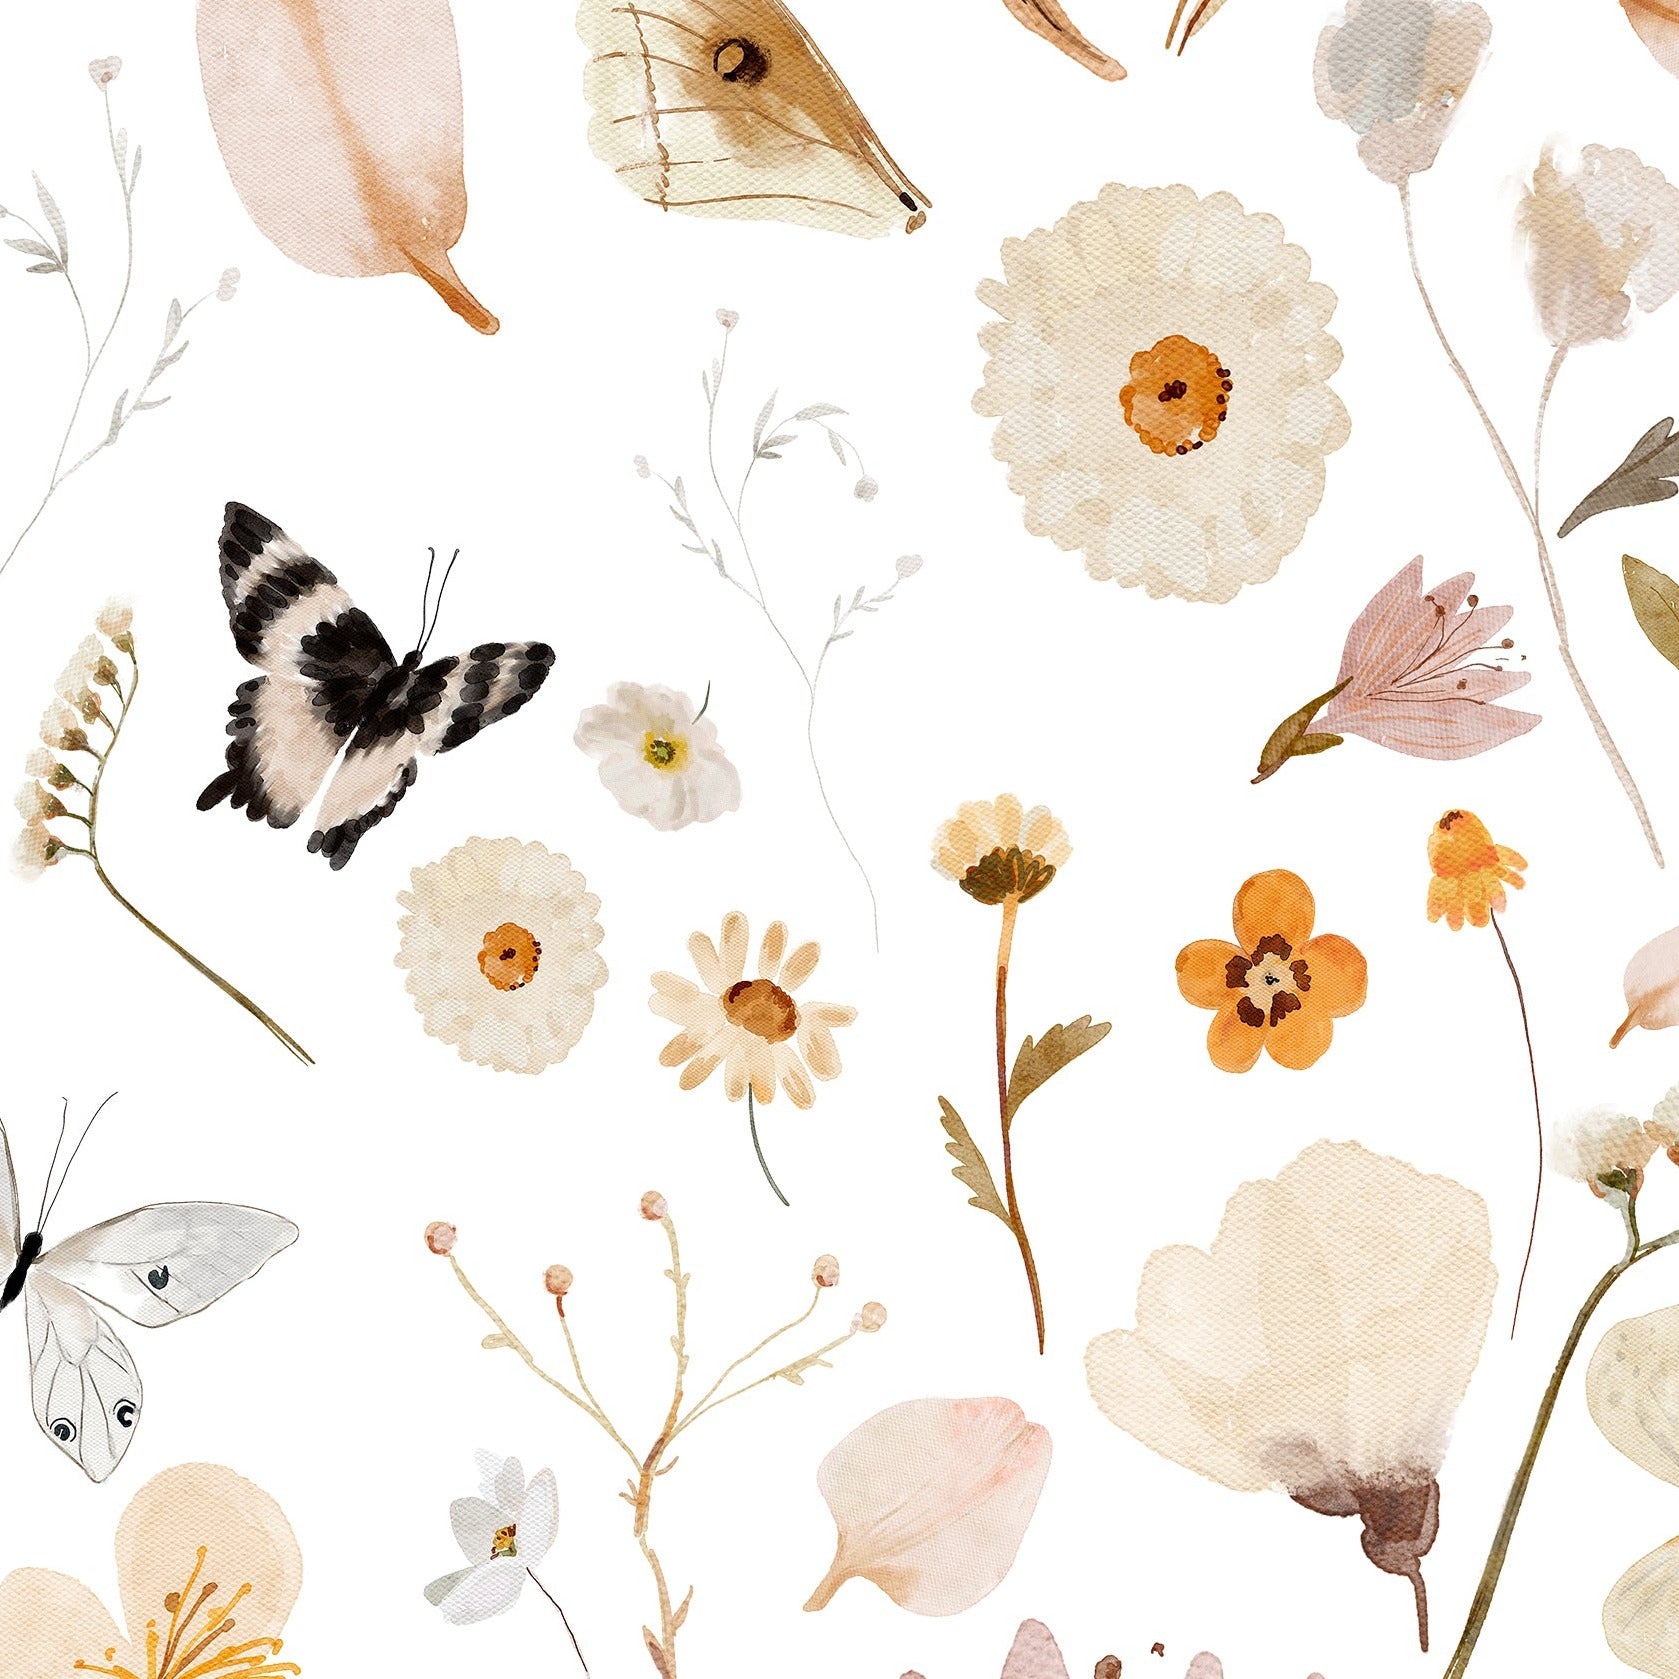 A square image showcasing the detailed design of the Boho Garden Wallpaper. A variety of botanical elements including flowers, butterflies, and foliage are artfully arranged in a bohemian style, with a color palette of muted pinks, yellows, and greens on a clean white background.